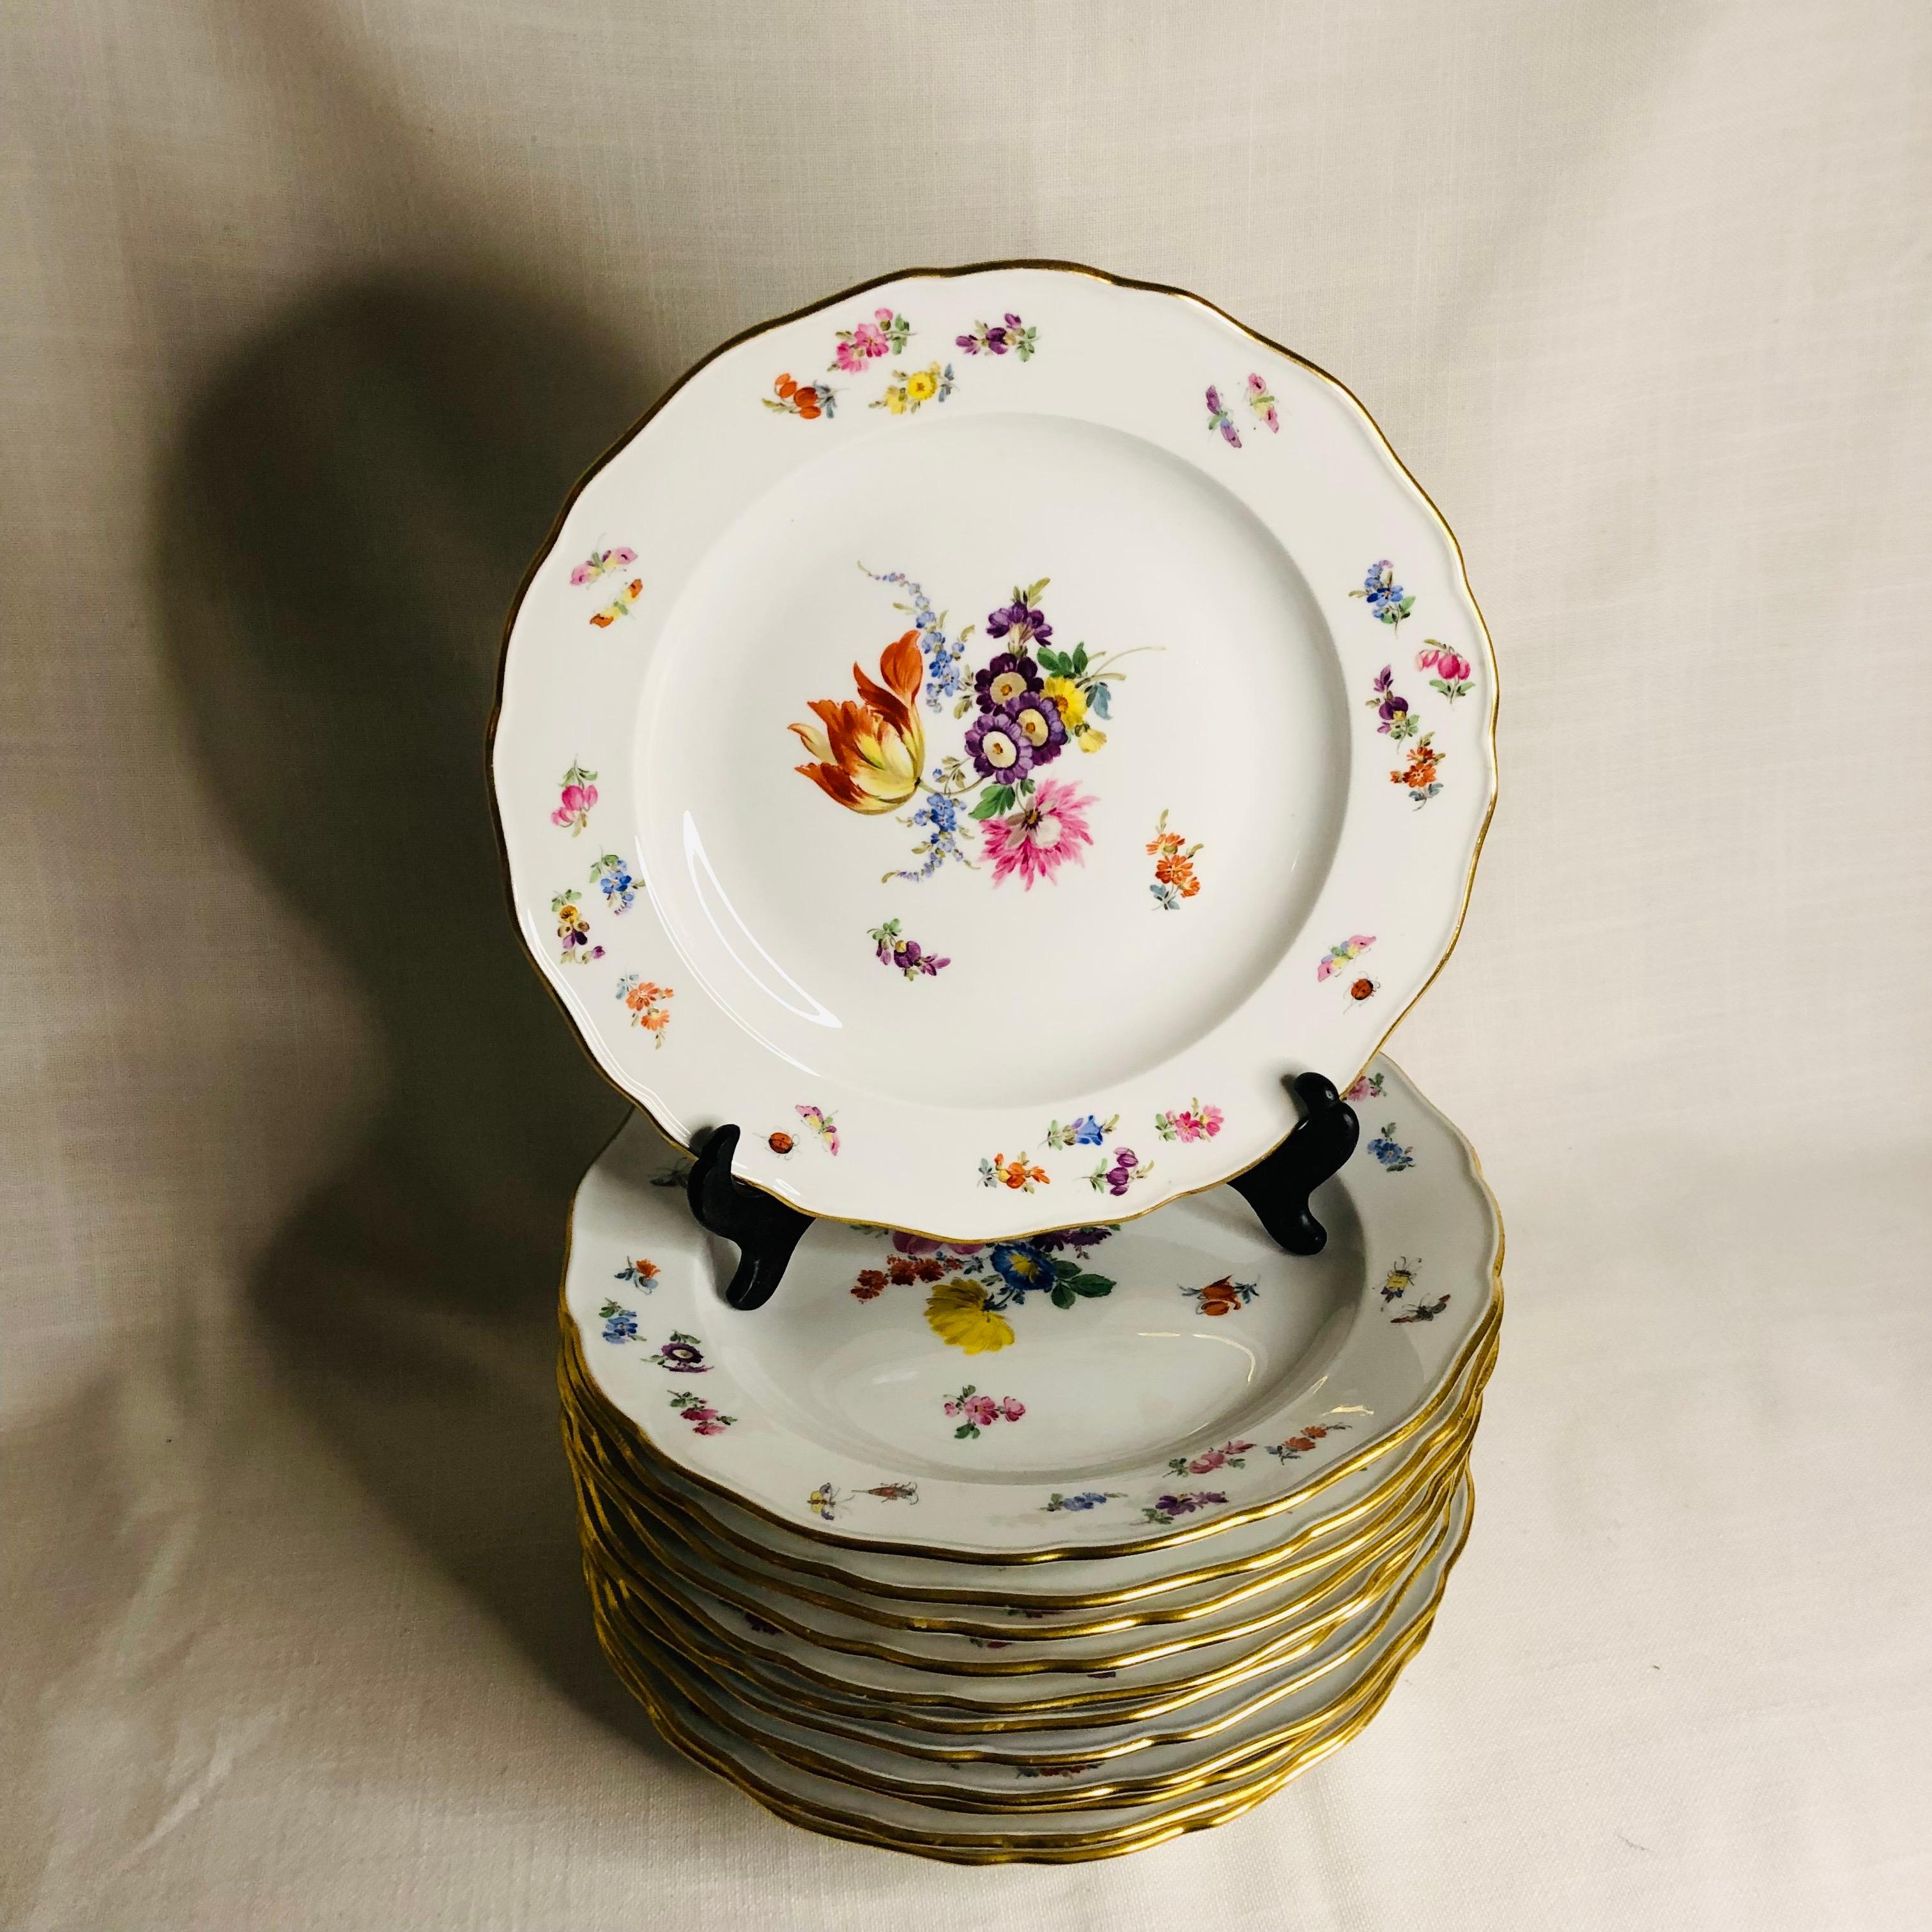 This is a fabulous set of twelve Meissen dinner plates. Each of these Meissen dinner plates are beautifully painted with a different large central flower bouquet. The artwork on these plates is exceptional. Inside the gold border, you. can see